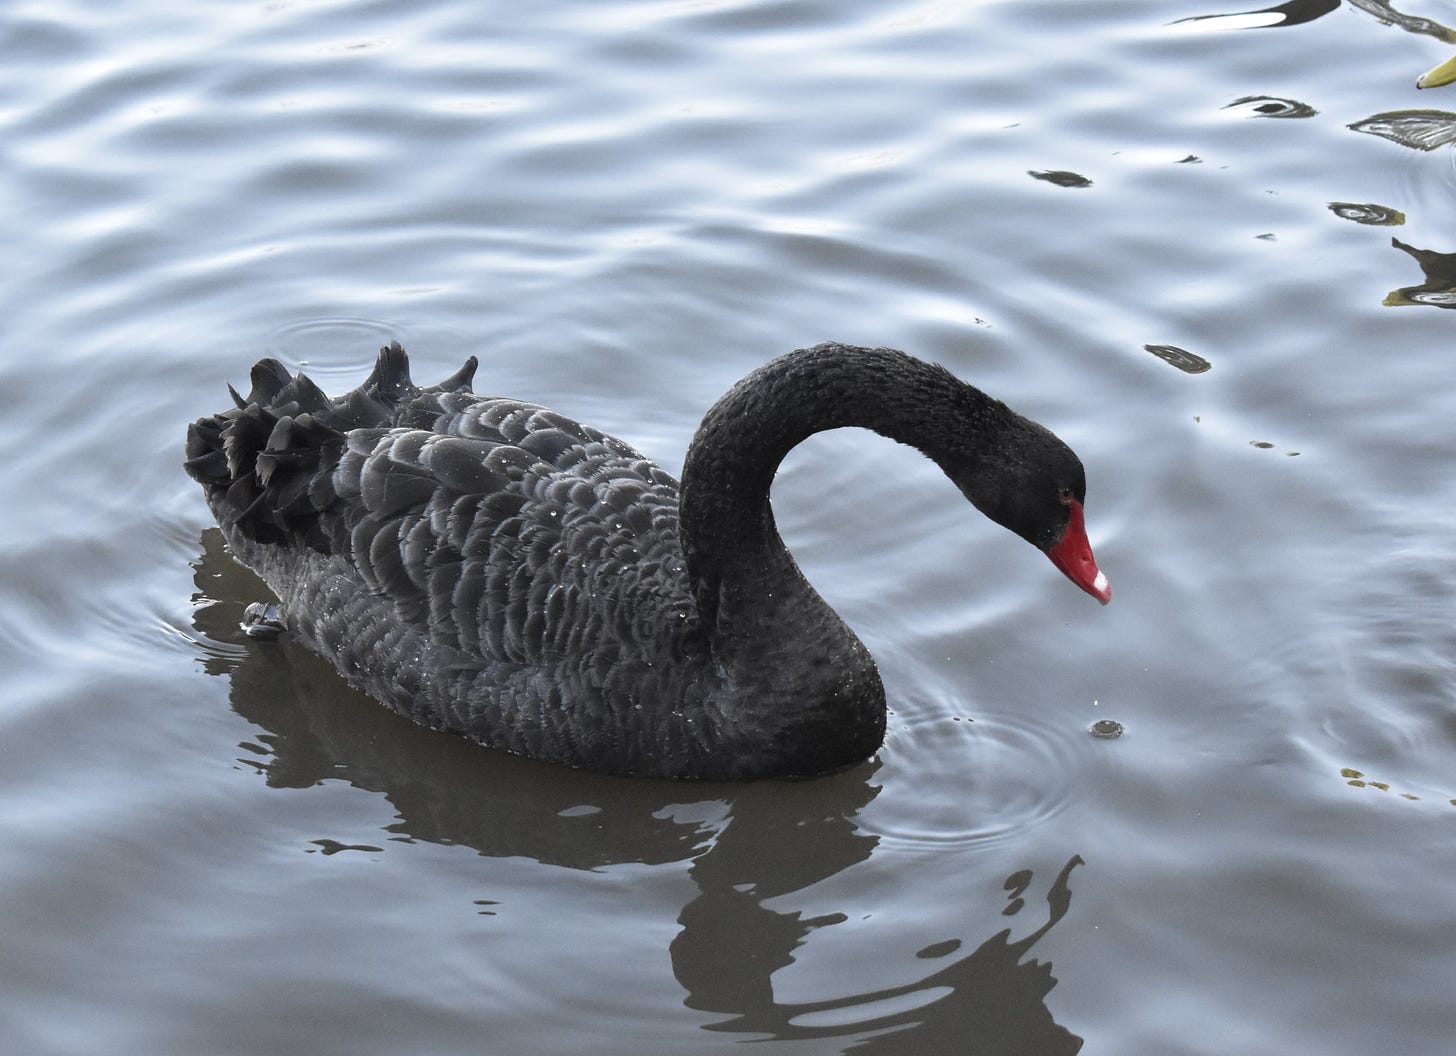 A black swan with a red bill swimming